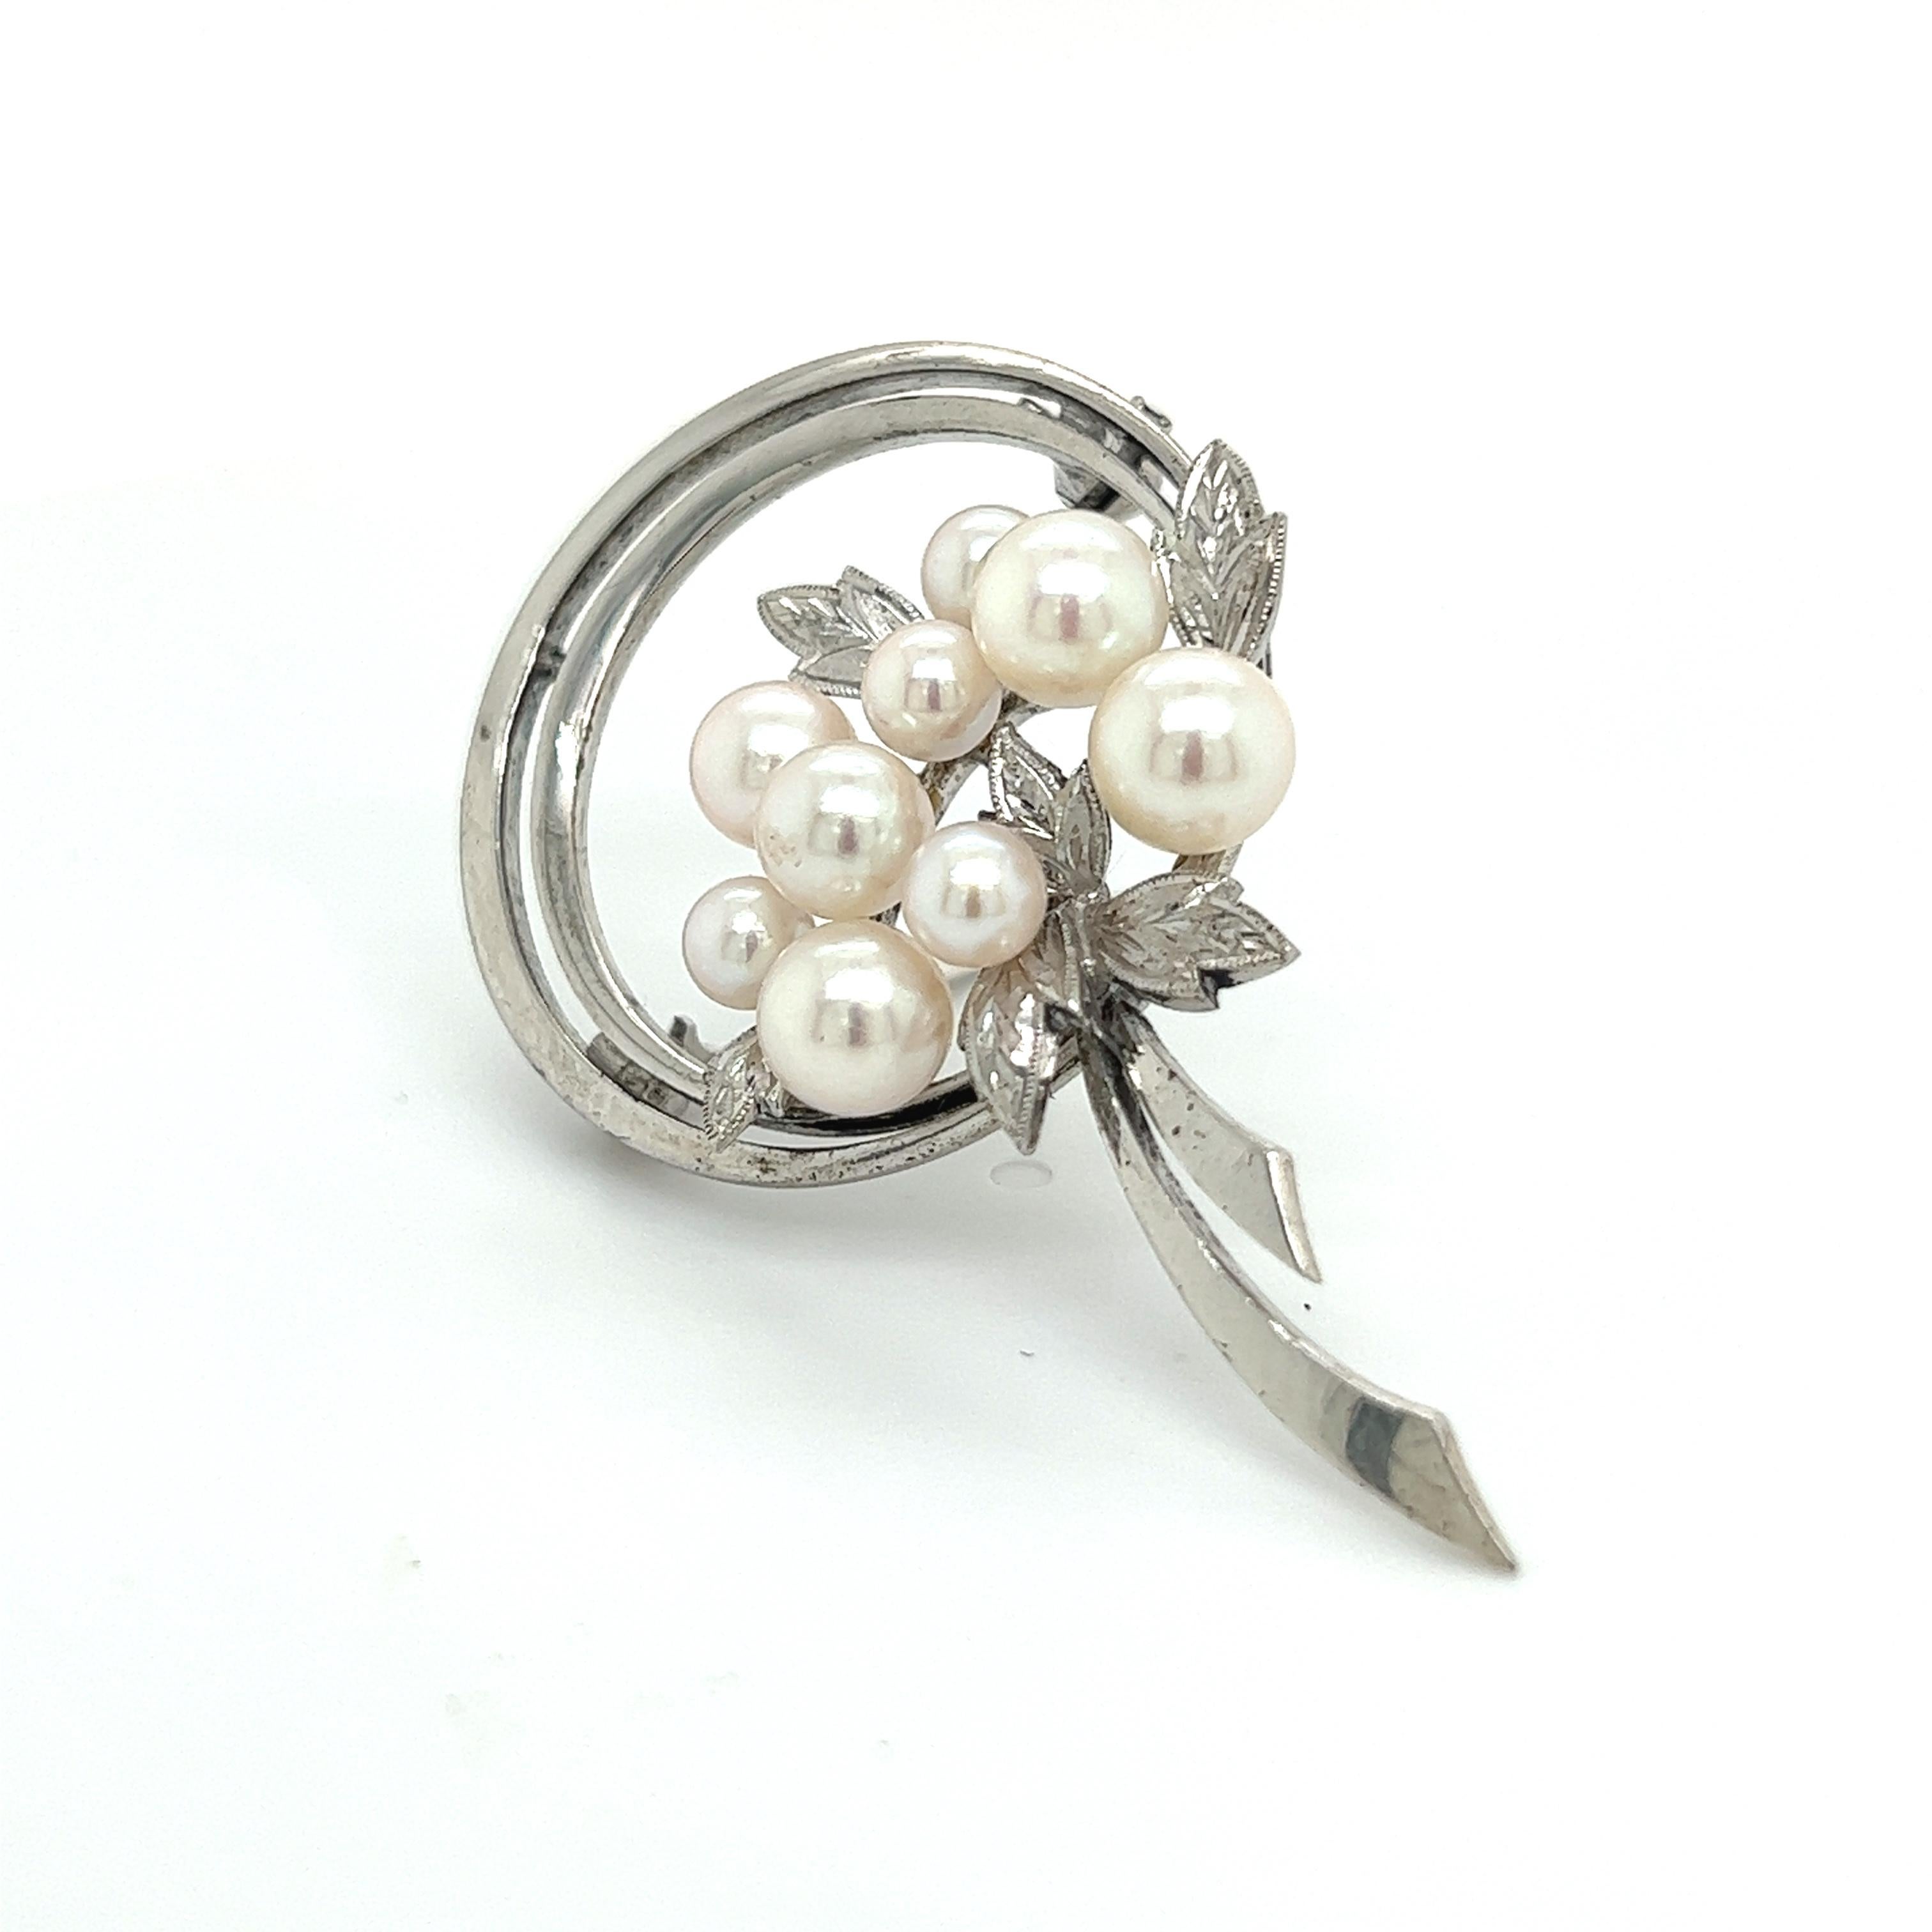 Mikimoto Estate Akoya Pearl Brooch Pin Sterling Silver 6 mm M278

This elegant Authentic Mikimoto Estate sterling silver brooch has 9 Saltwater Akoya Cultured Pearls 4.00 - 6.00 mm and has a weight of 6.6 Grams.

TRUSTED SELLER SINCE 2002

PLEASE